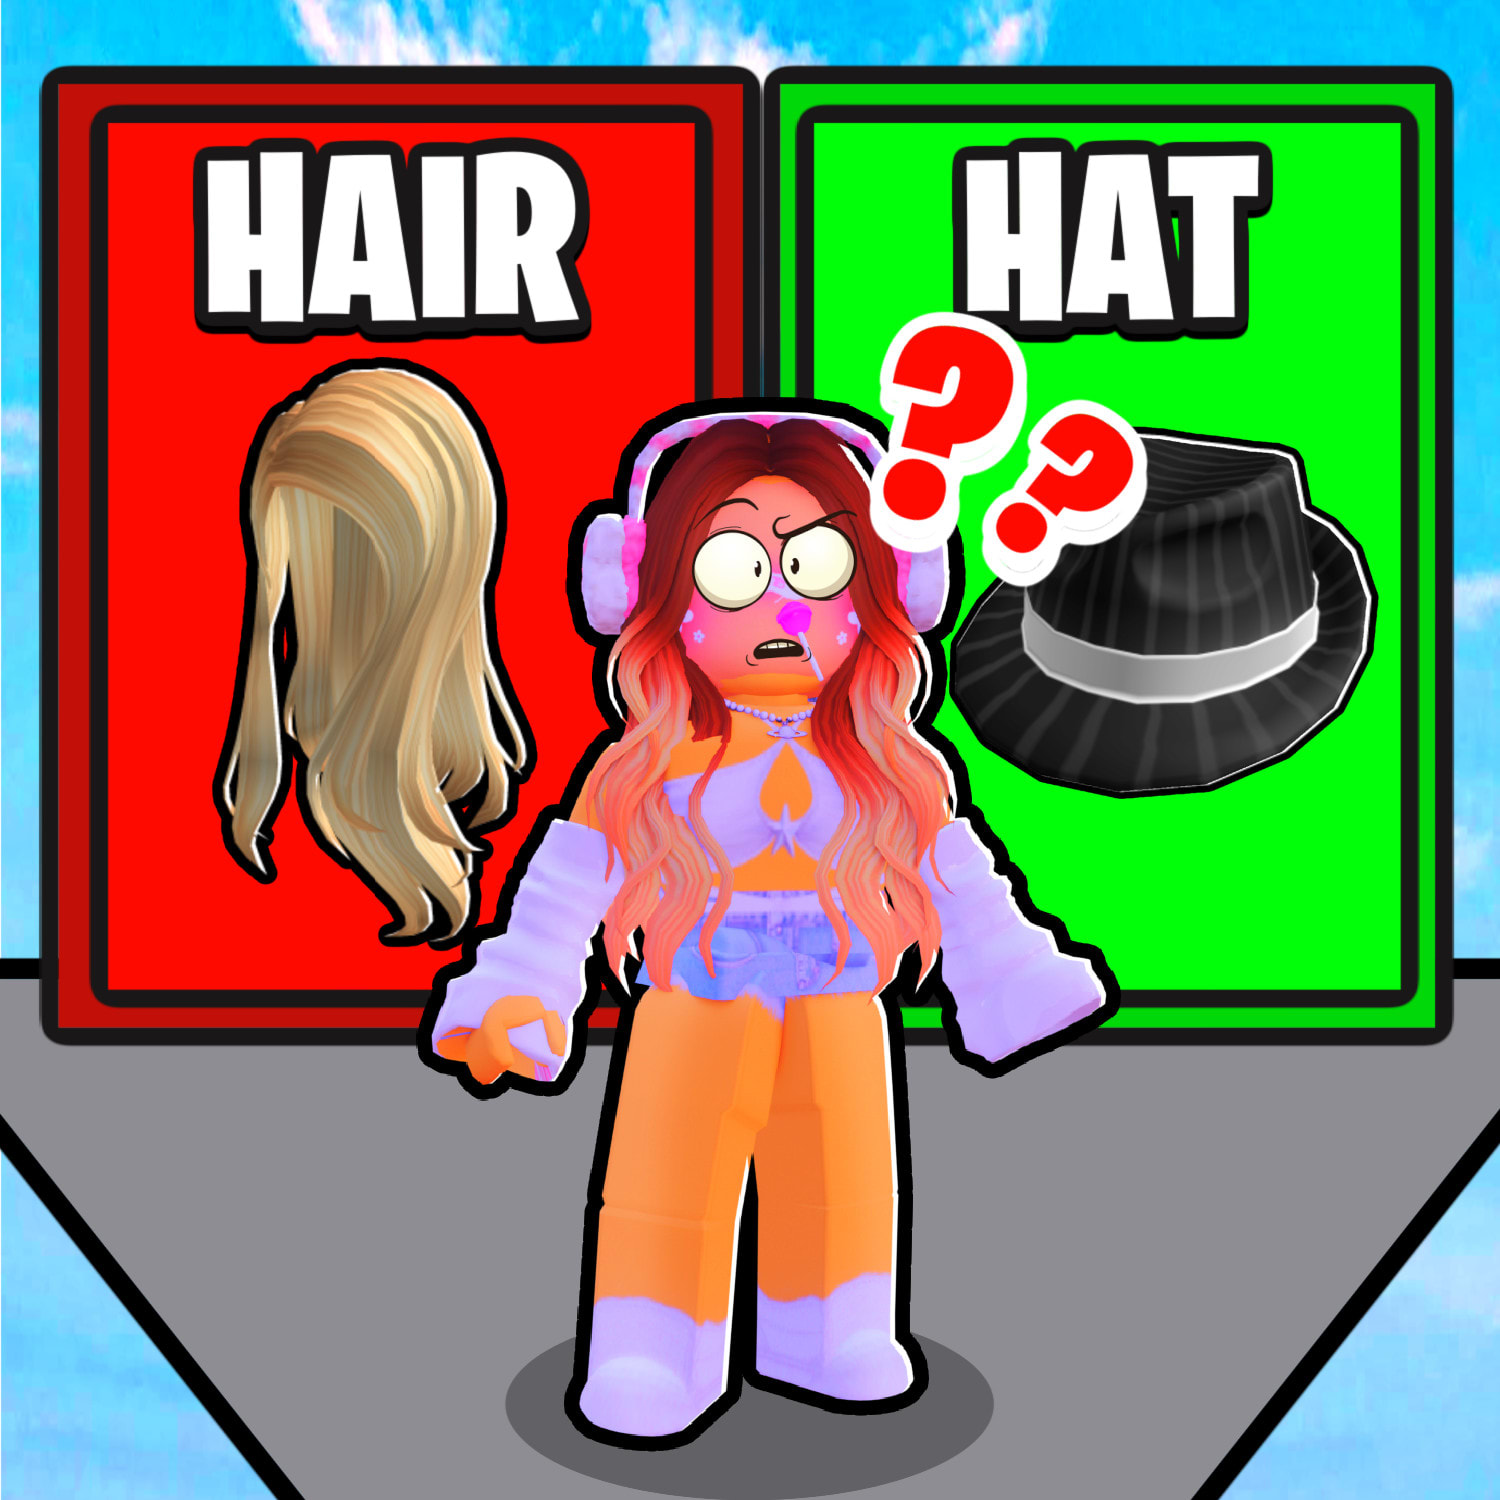 Make you a clickbait roblox  thumbnail by Mrgdr3